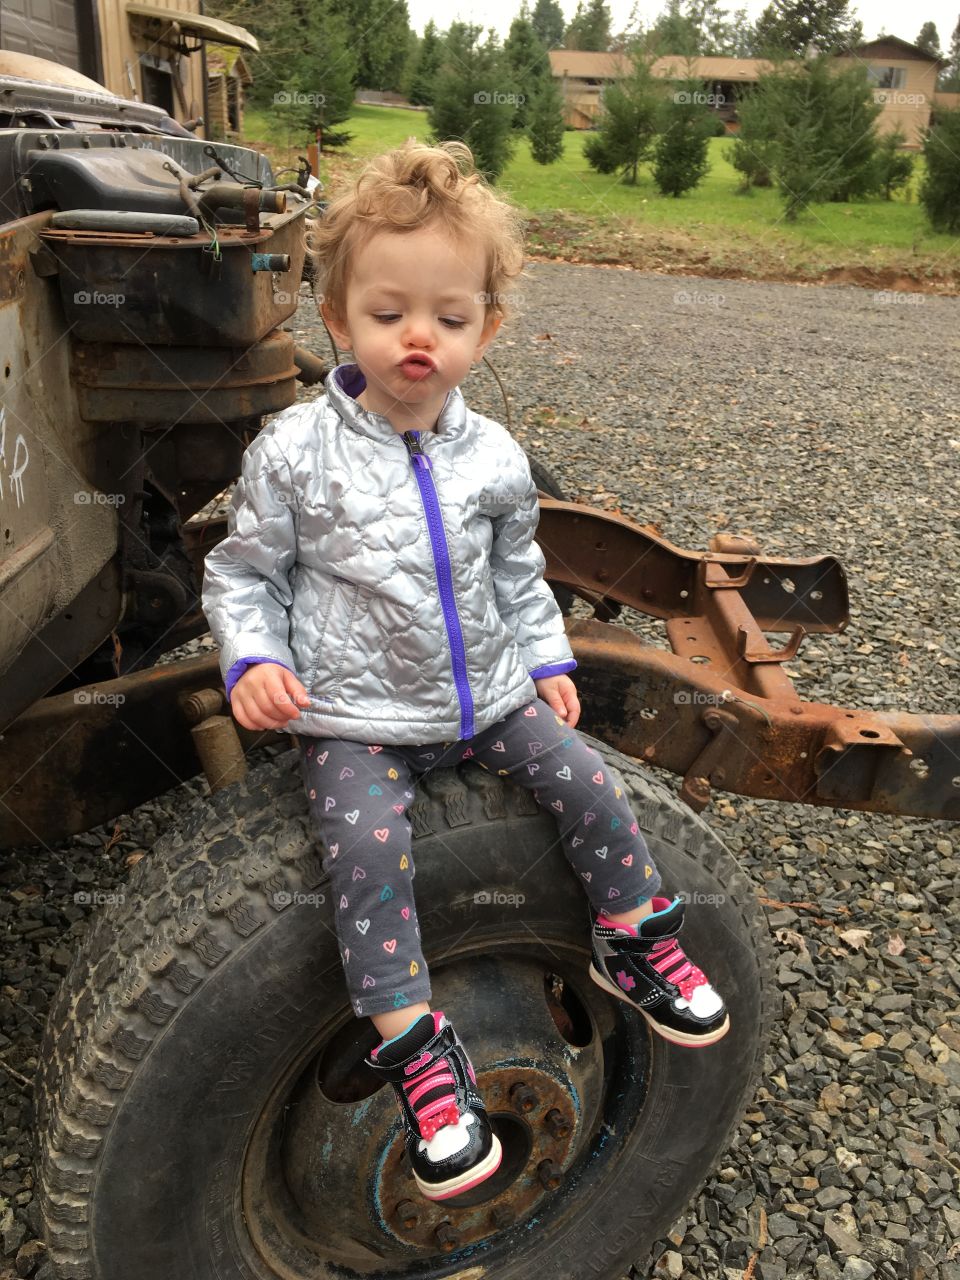 Sitting on the tire of grandpa’s project truck